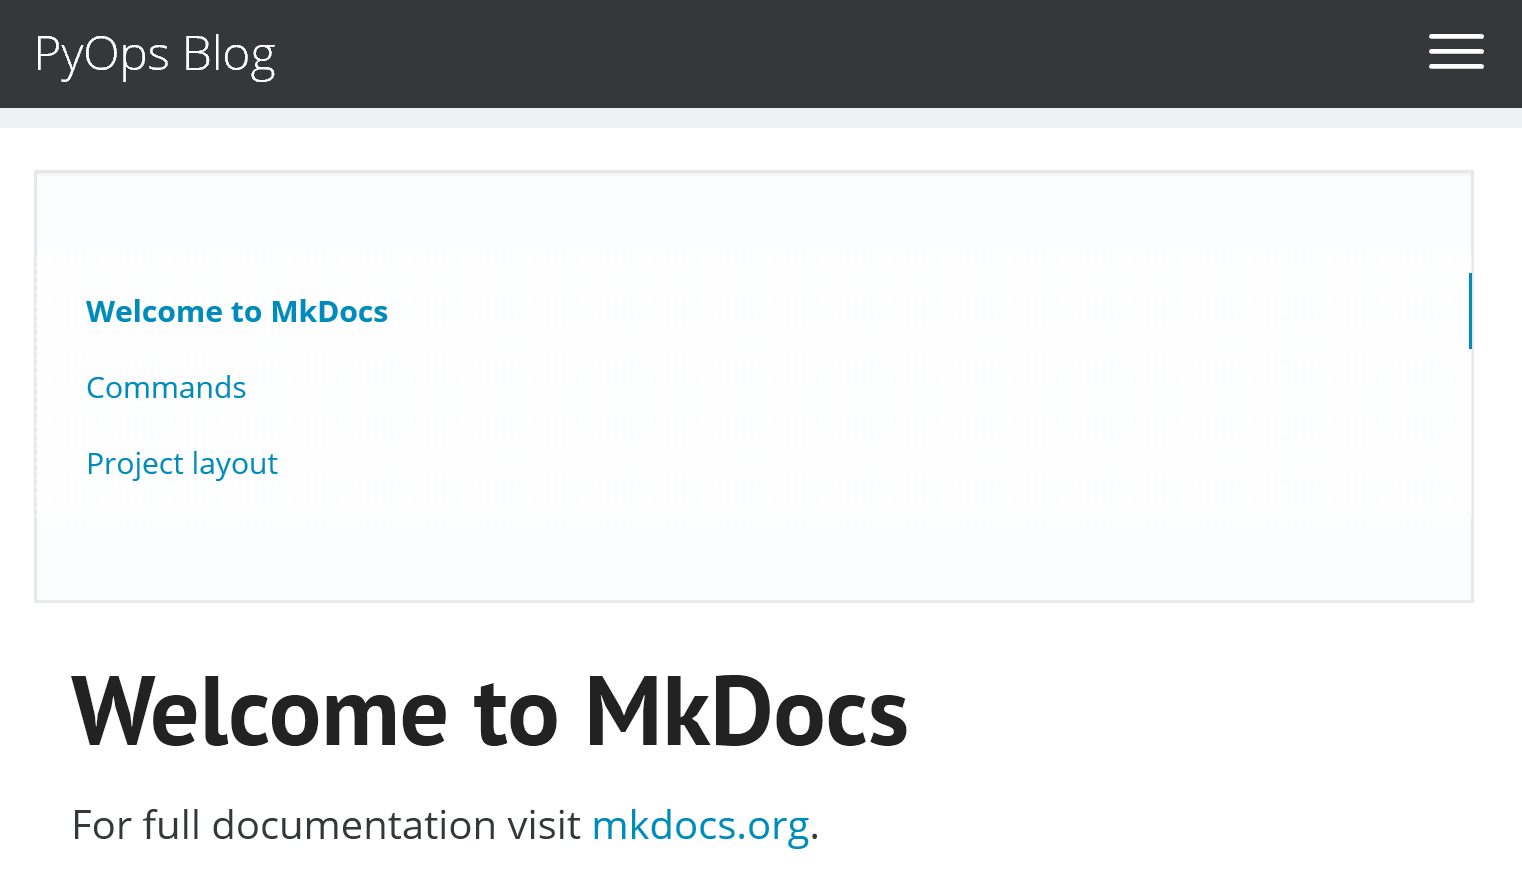 MkDocs New Site with Cinder Theme applied